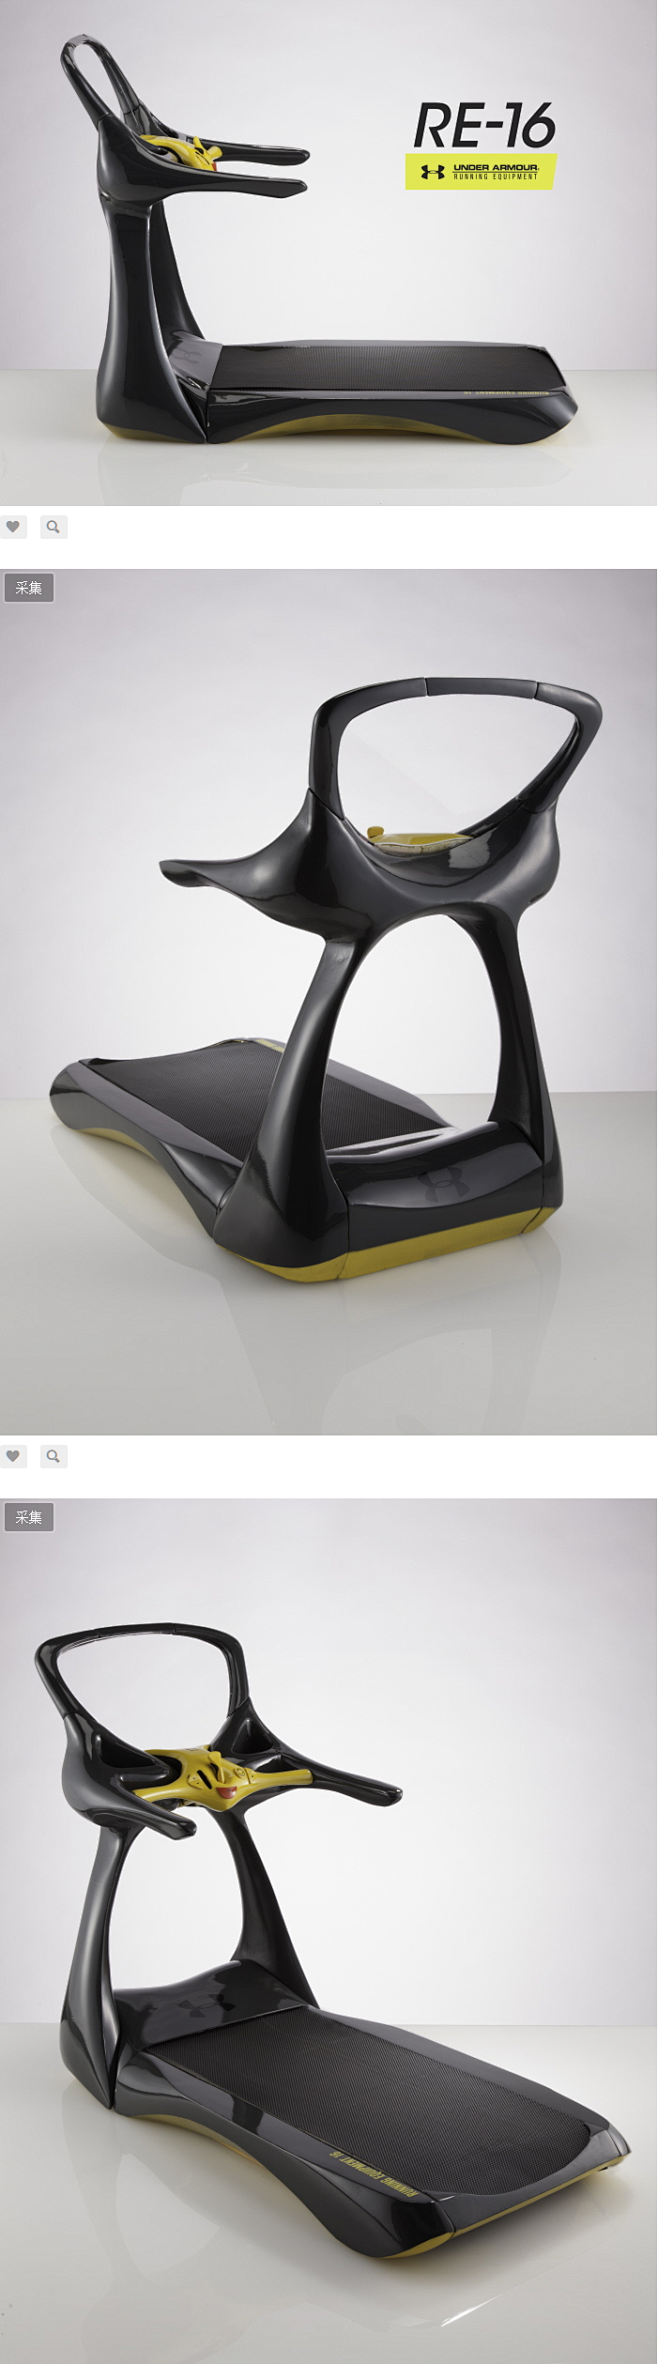 Treadmill Concept by...